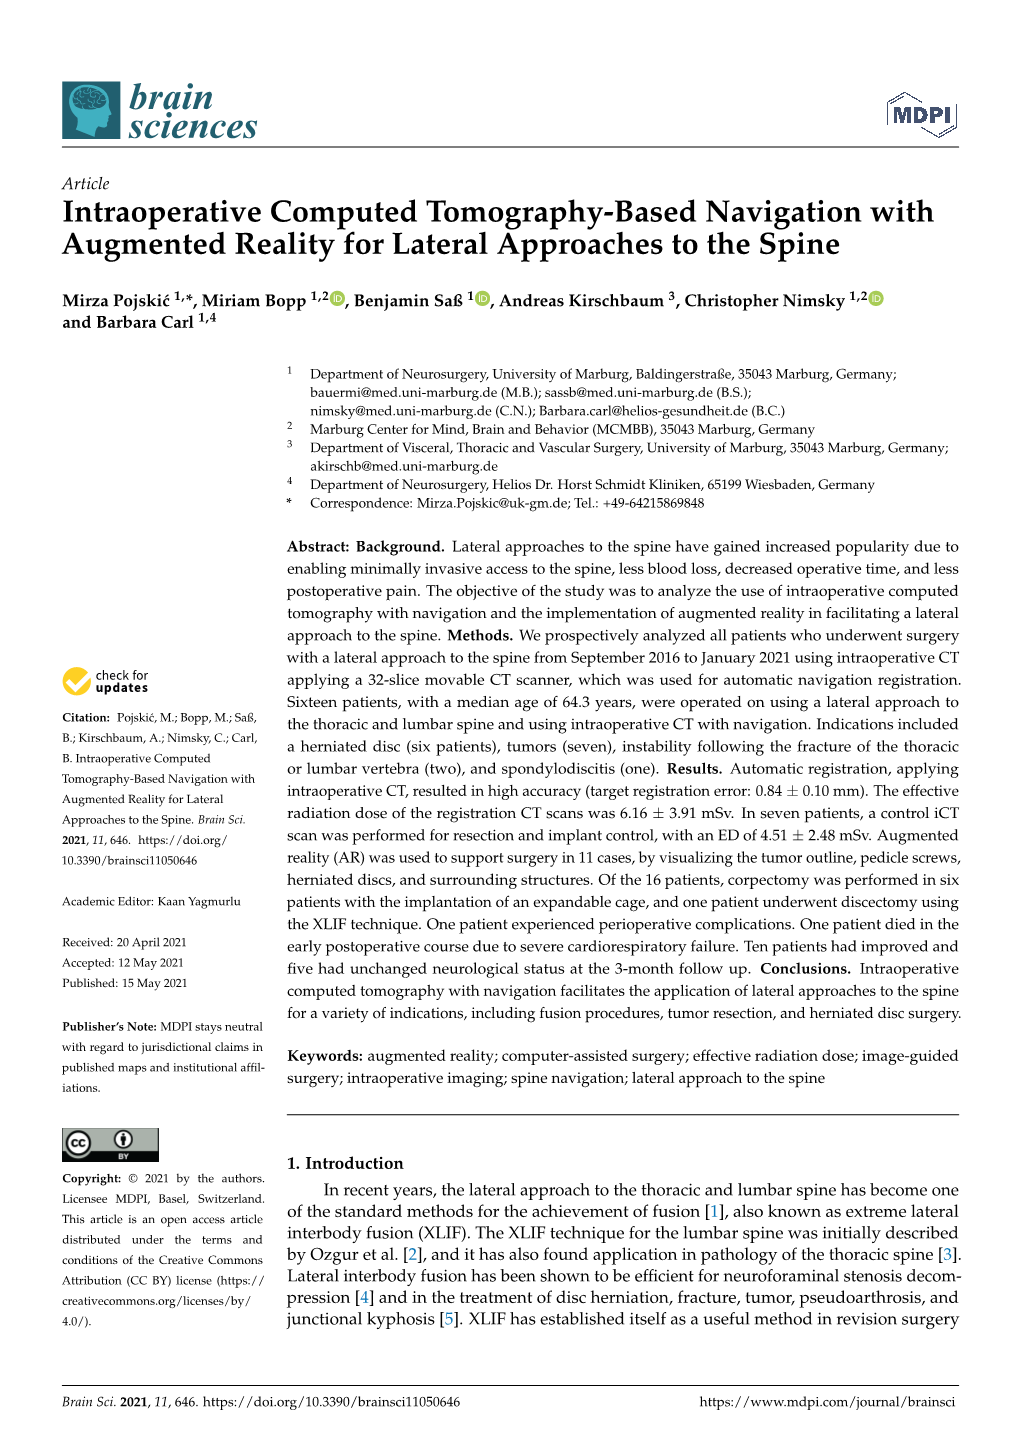 Intraoperative Computed Tomography-Based Navigation with Augmented Reality for Lateral Approaches to the Spine